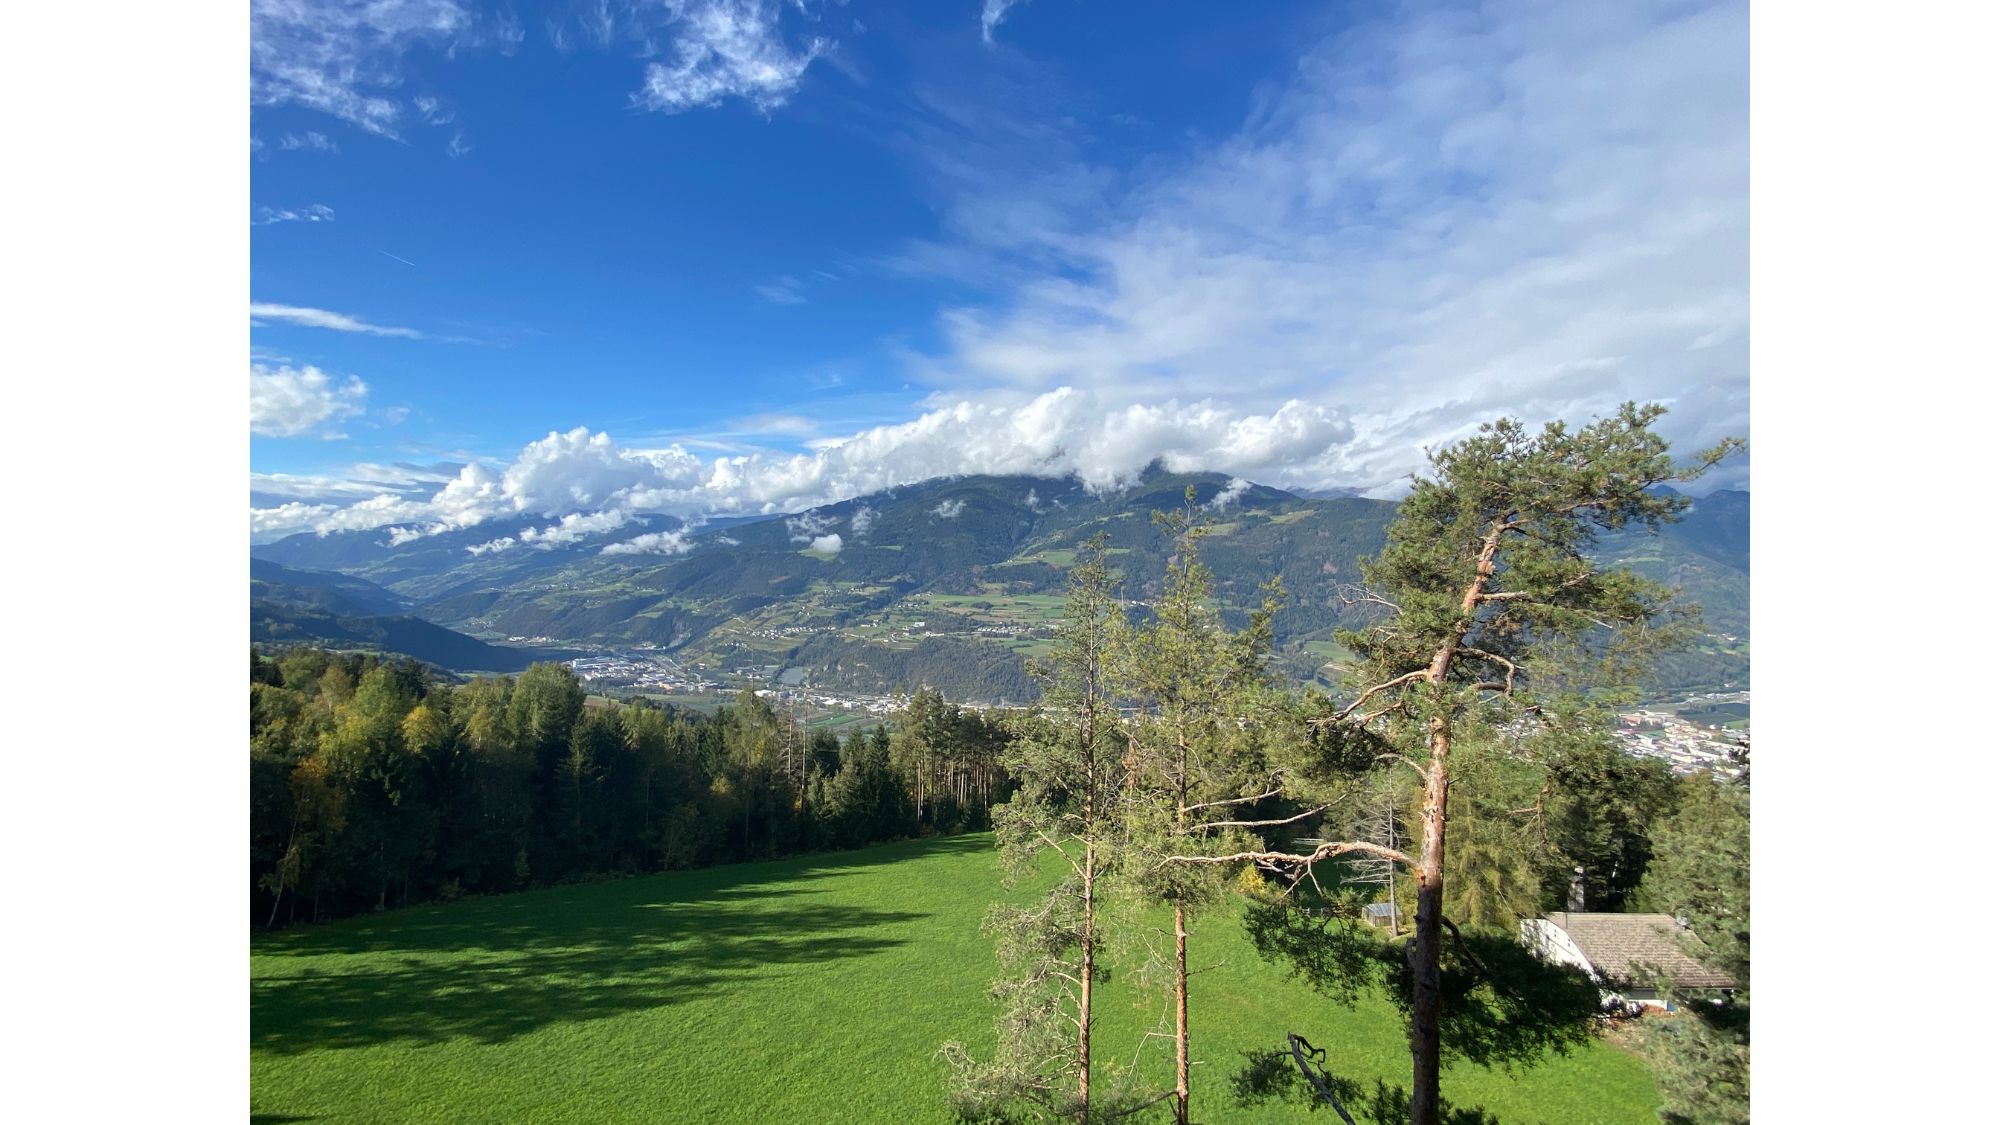 View of Bressanone-Brixen from the My Arbor treetop hotel in the Dolomites